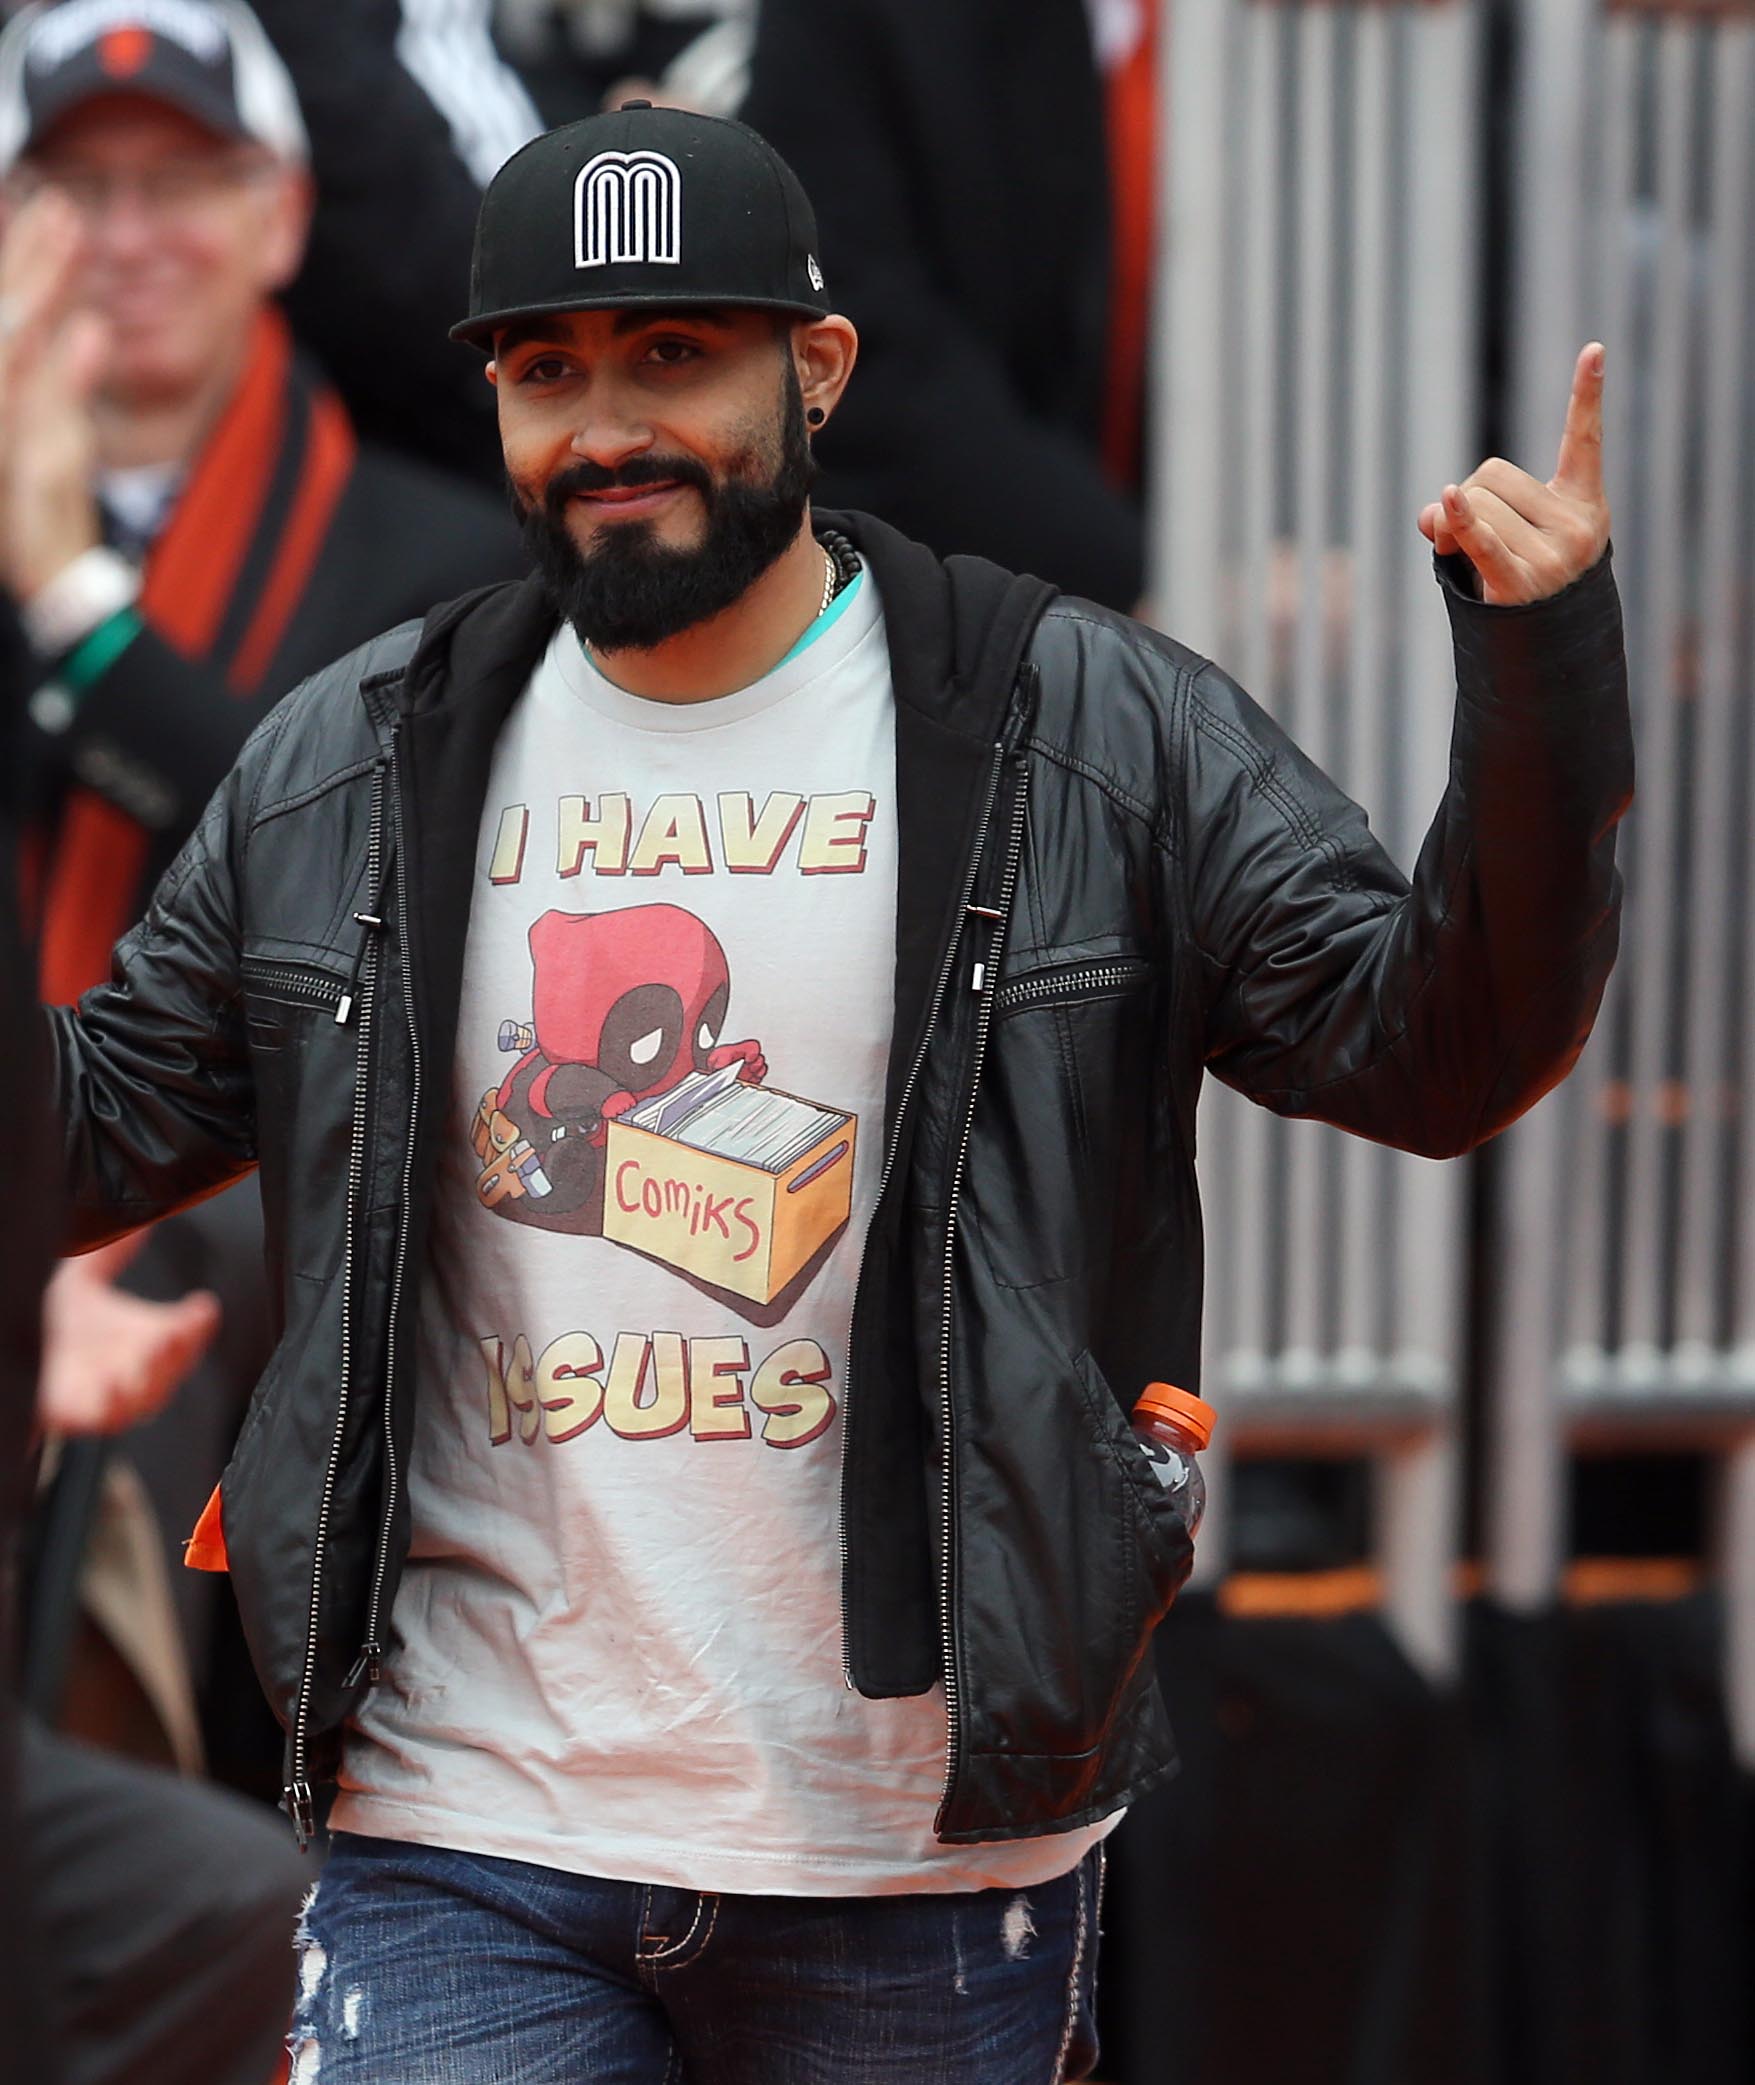 San Francisco Giants pitcher Sergio Romo acknowledges the crowd as they celebrate their World Series championship at Civic Center Plaza in San Francisco, Calif., on Friday, October 31, 2014. (Jane Tyska/Bay Area News Group)